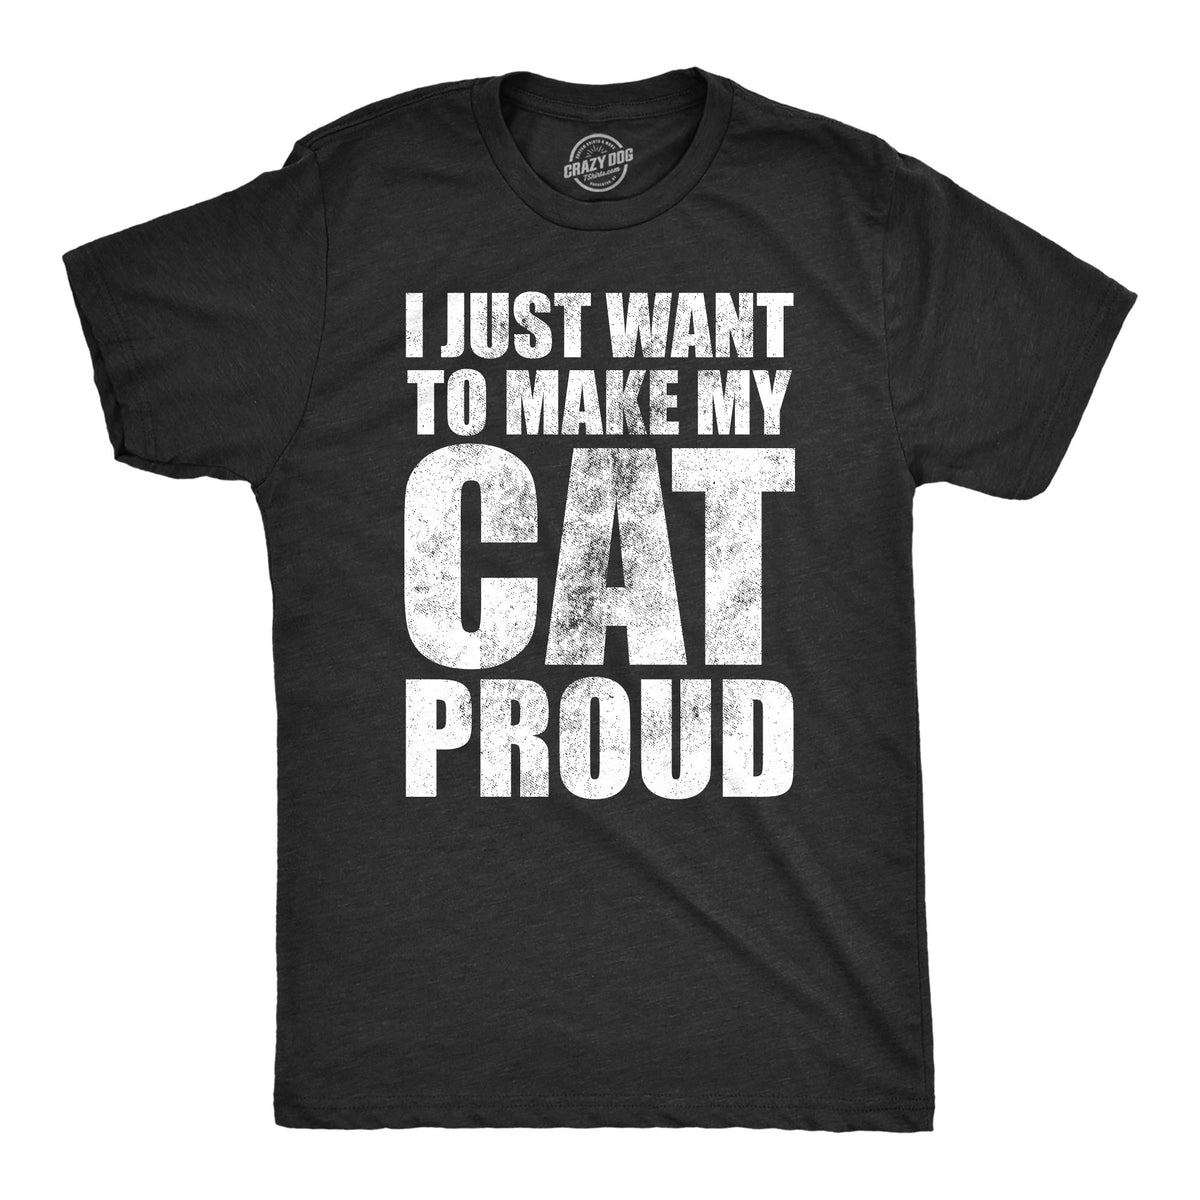 Funny Heather Black - CATPROUD I Just Want To Make My Cat Proud Mens T Shirt Nerdy Cat sarcastic Tee